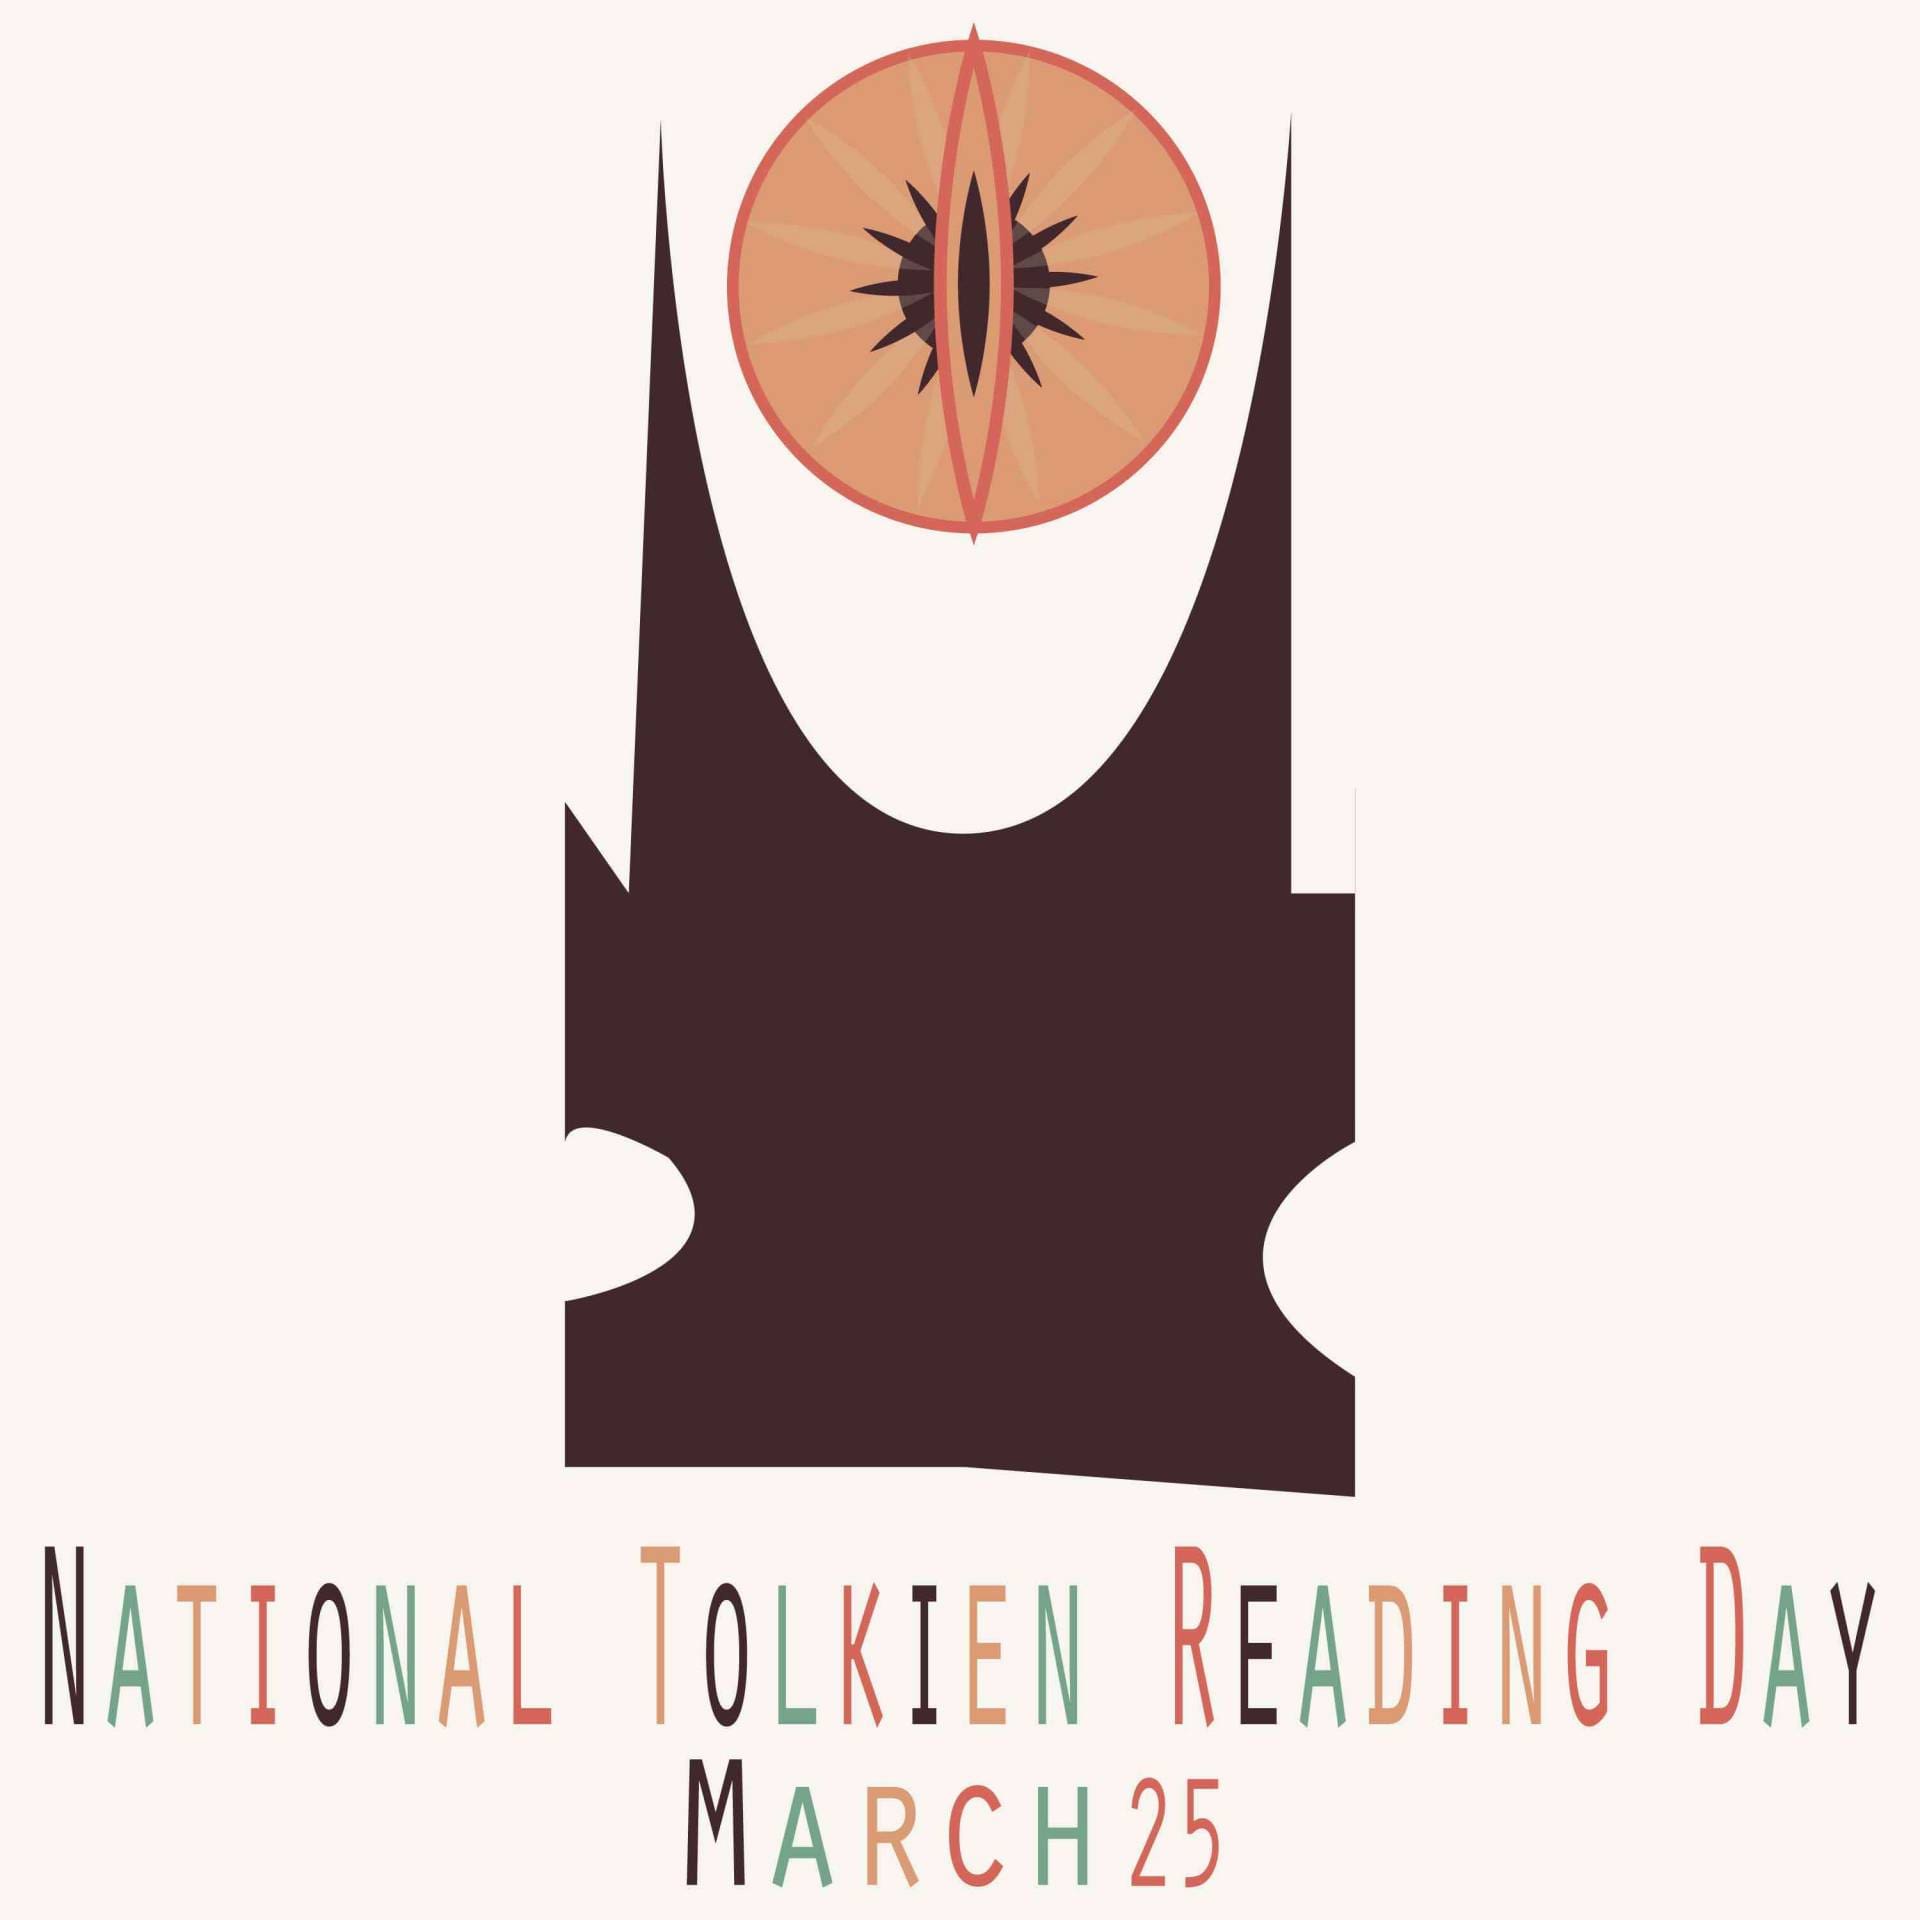 National Tolkien Reading Day is March 25th